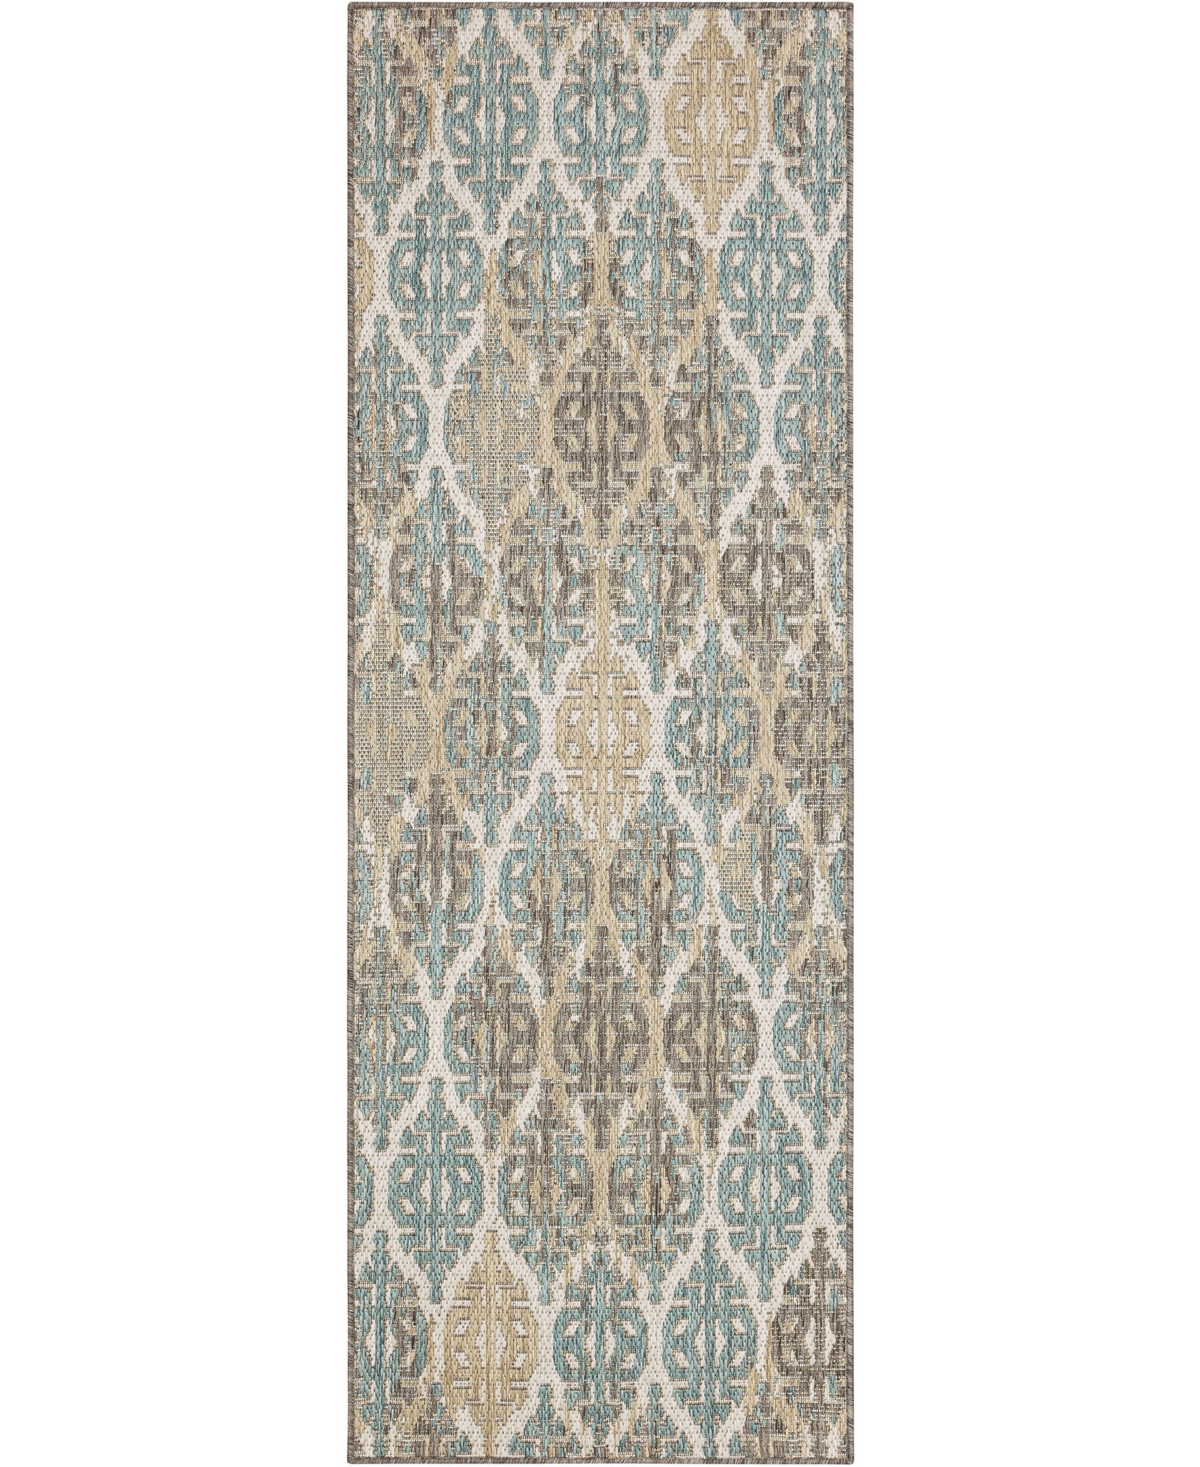 Mohawk Malibu Outdoor Stamped Ikat 2'5" X 6' Area Rug In Silver